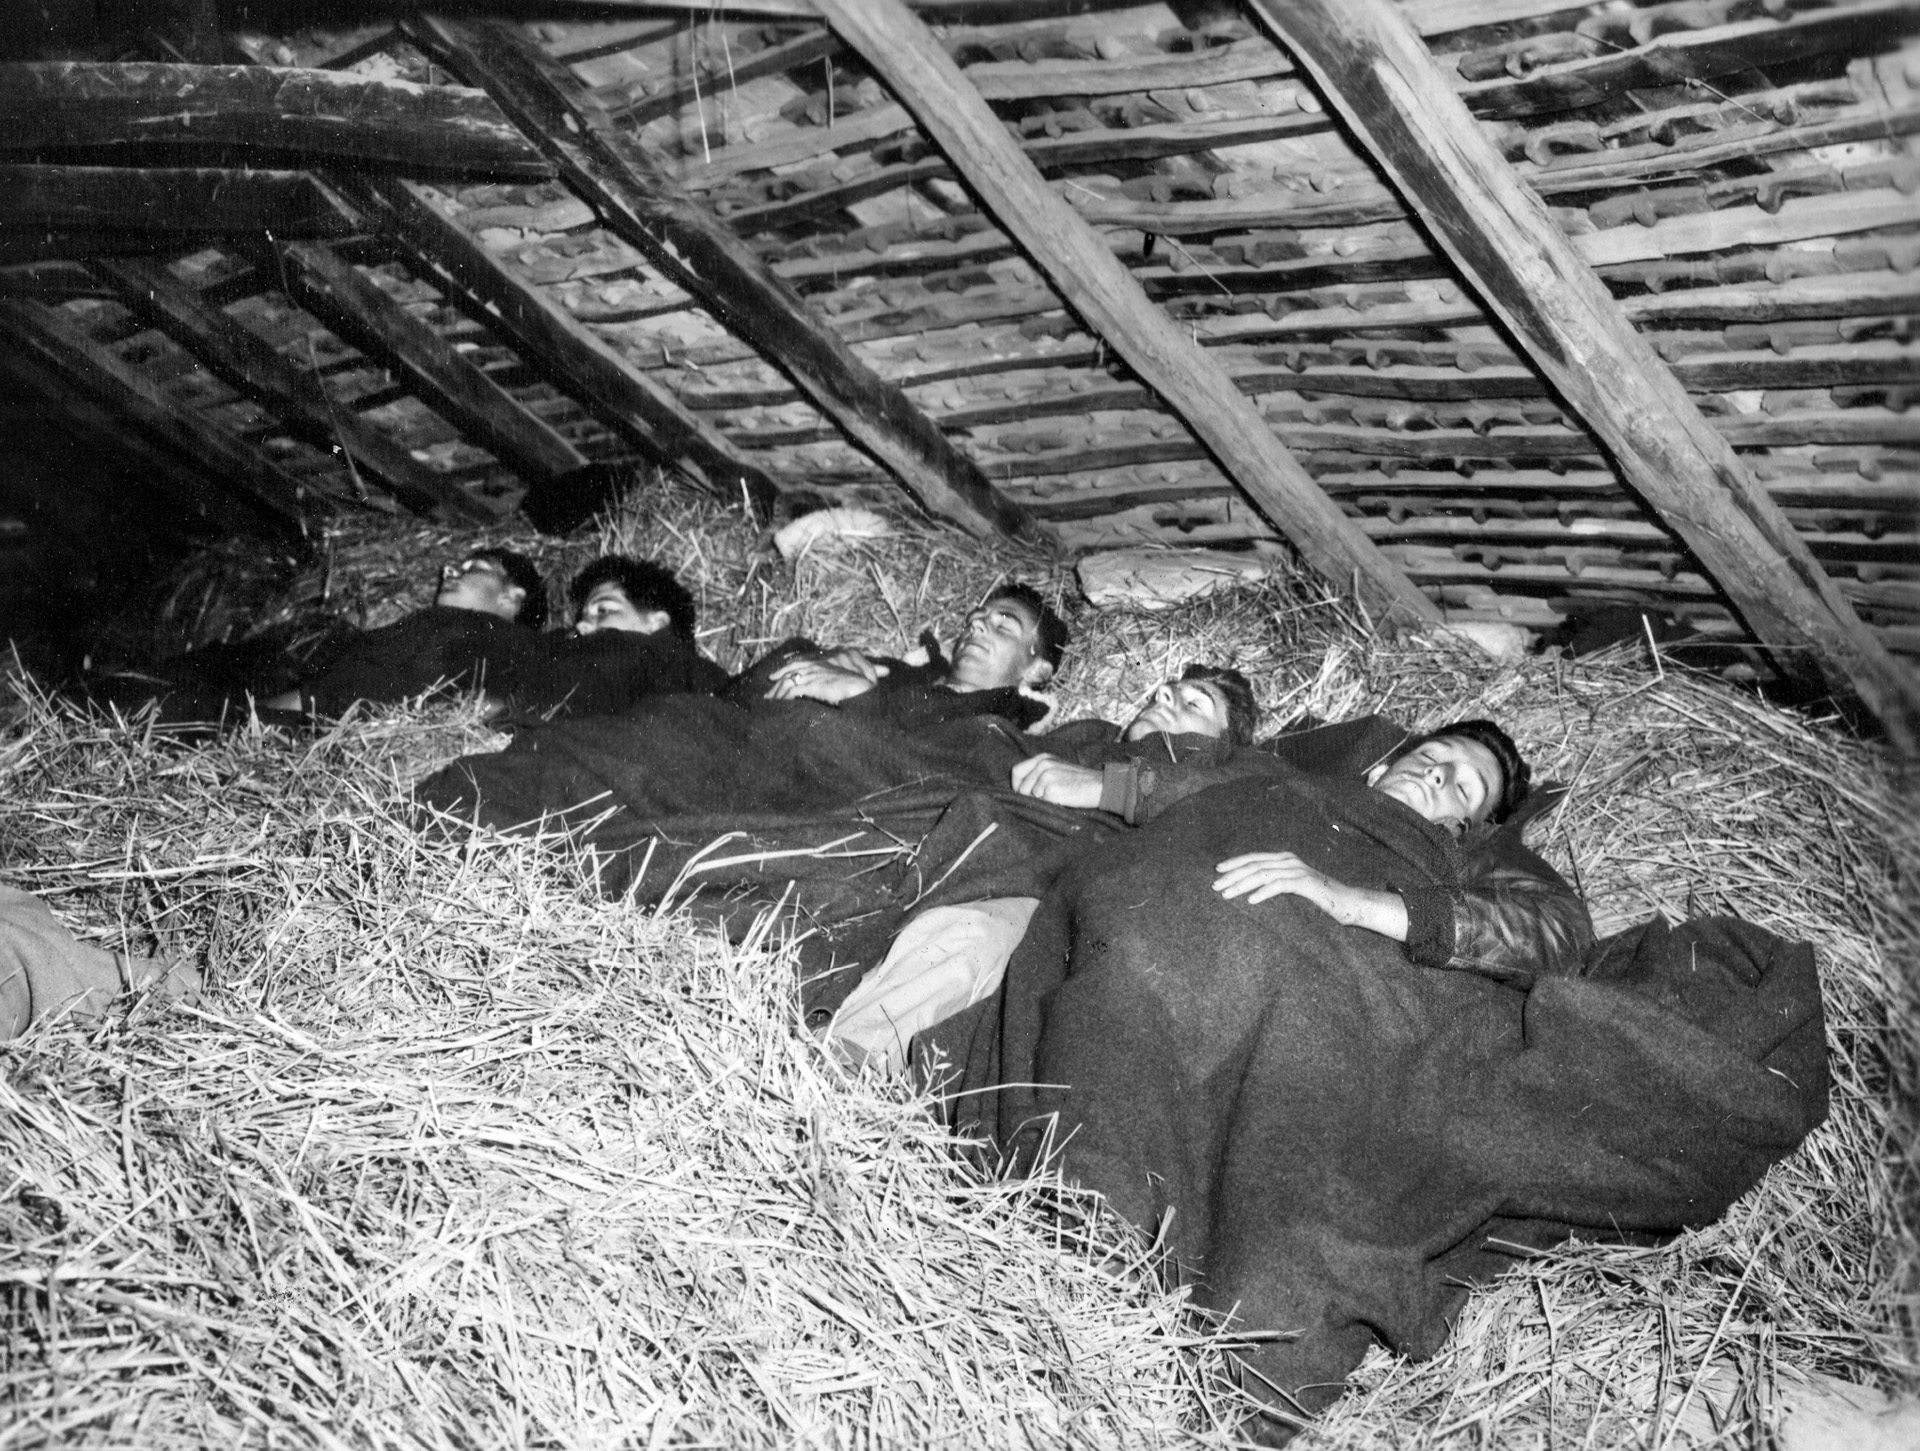 As they await air rescue via Operation Halyard, a group of American airmen get some sleep in a hayloft somewhere in Yugoslavia. A cooperative effort to get downed airmen out of Nazi-occupied territory, Operation Halyard was a remarkable success.